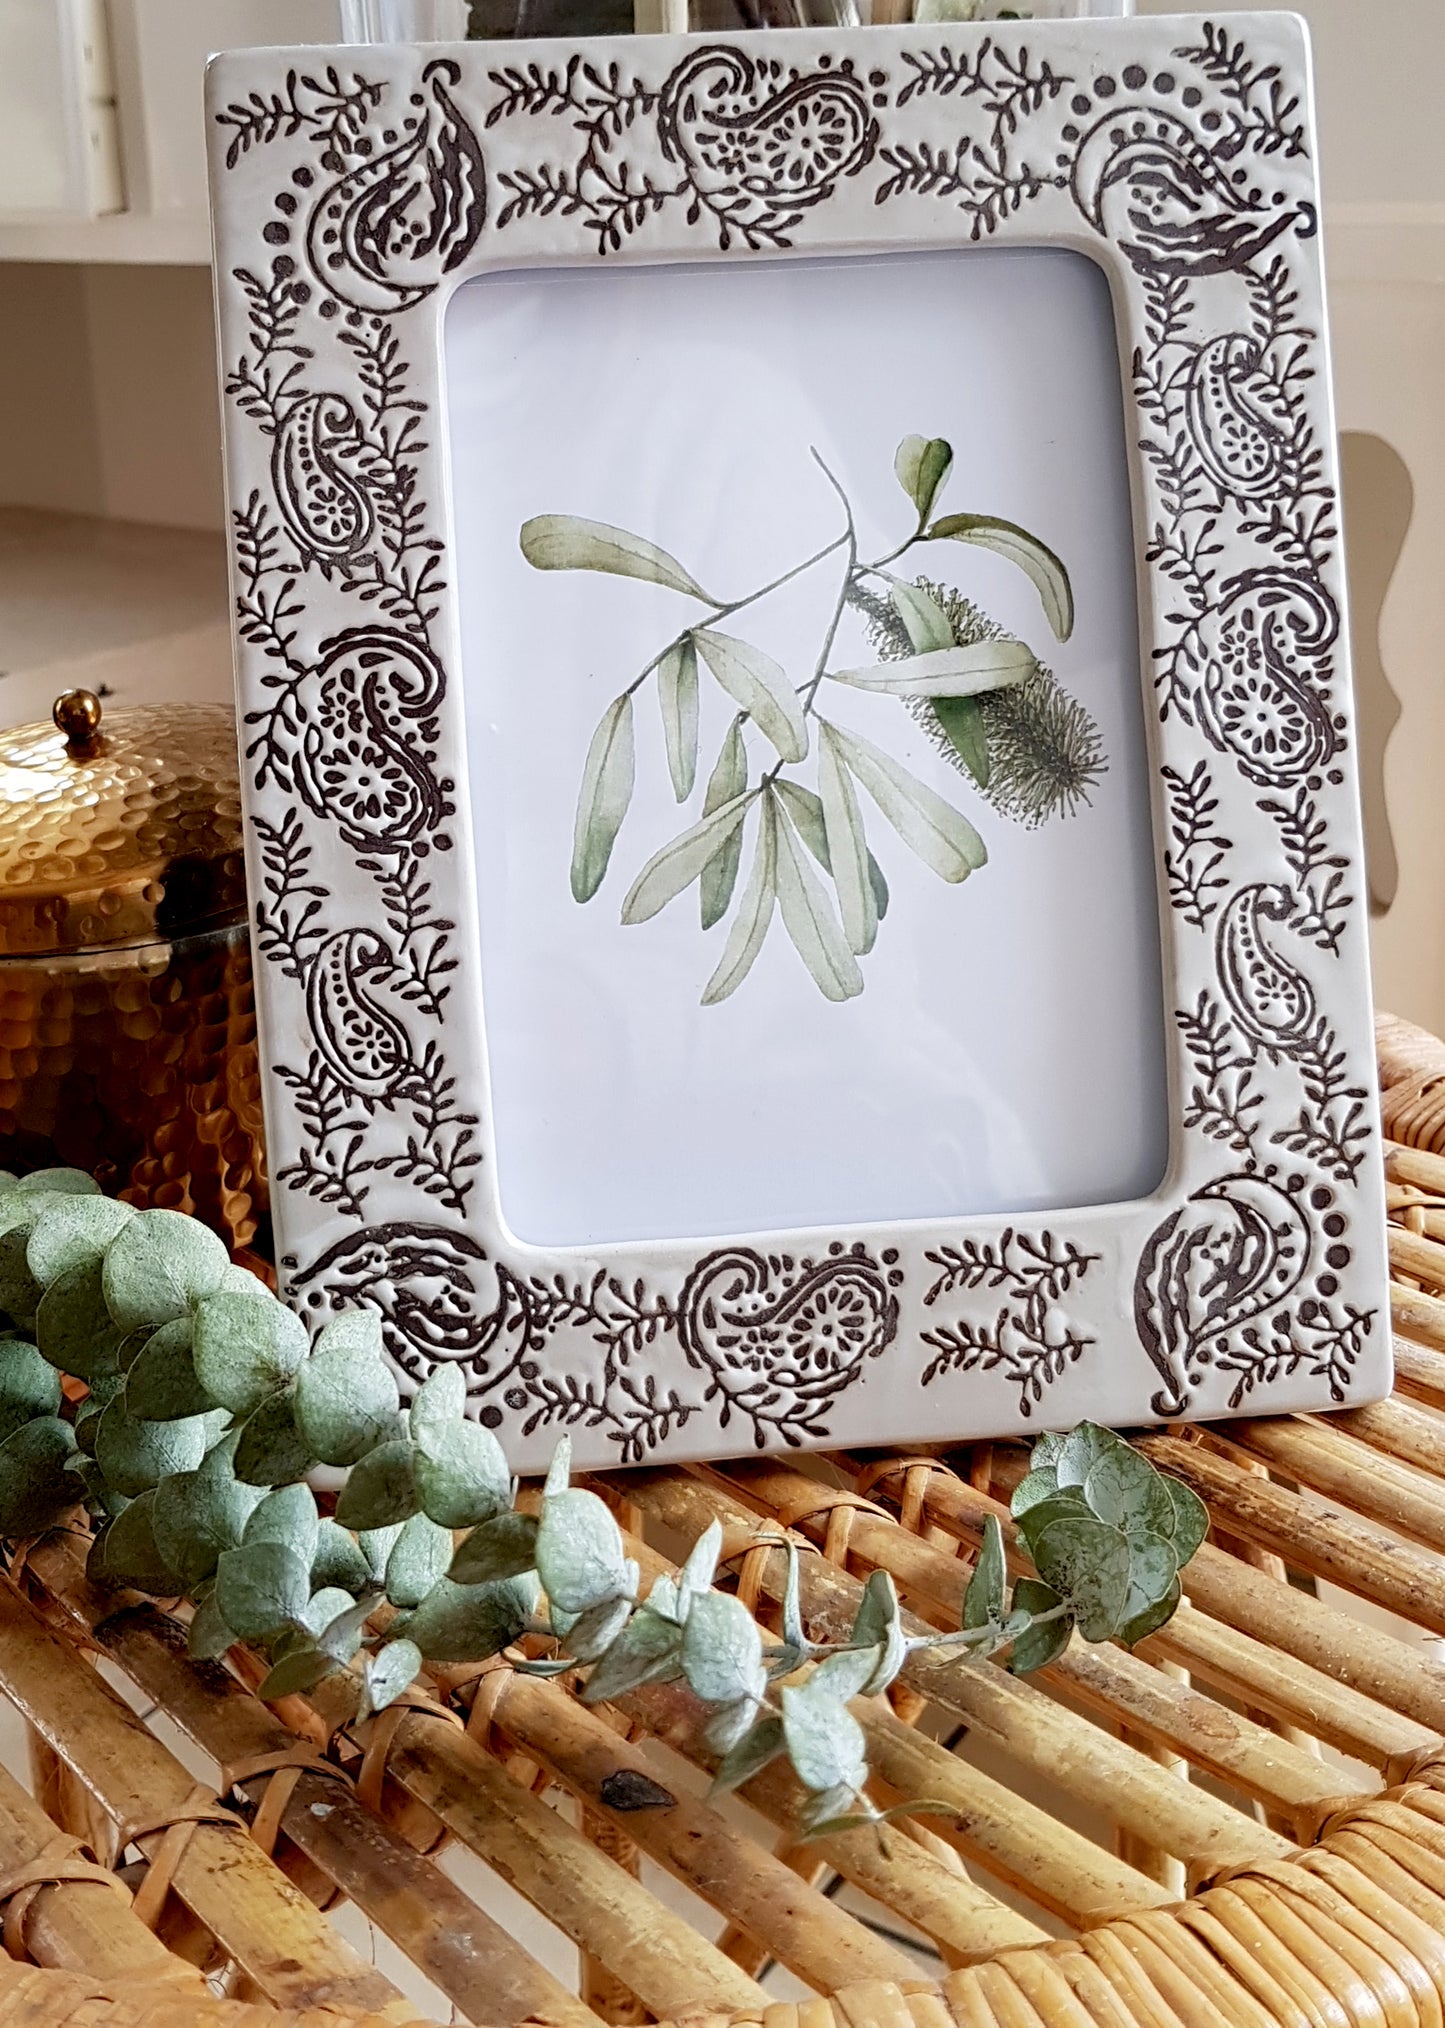 Banksia watercolour image featured in a frame to show how this invite design translates into artwork